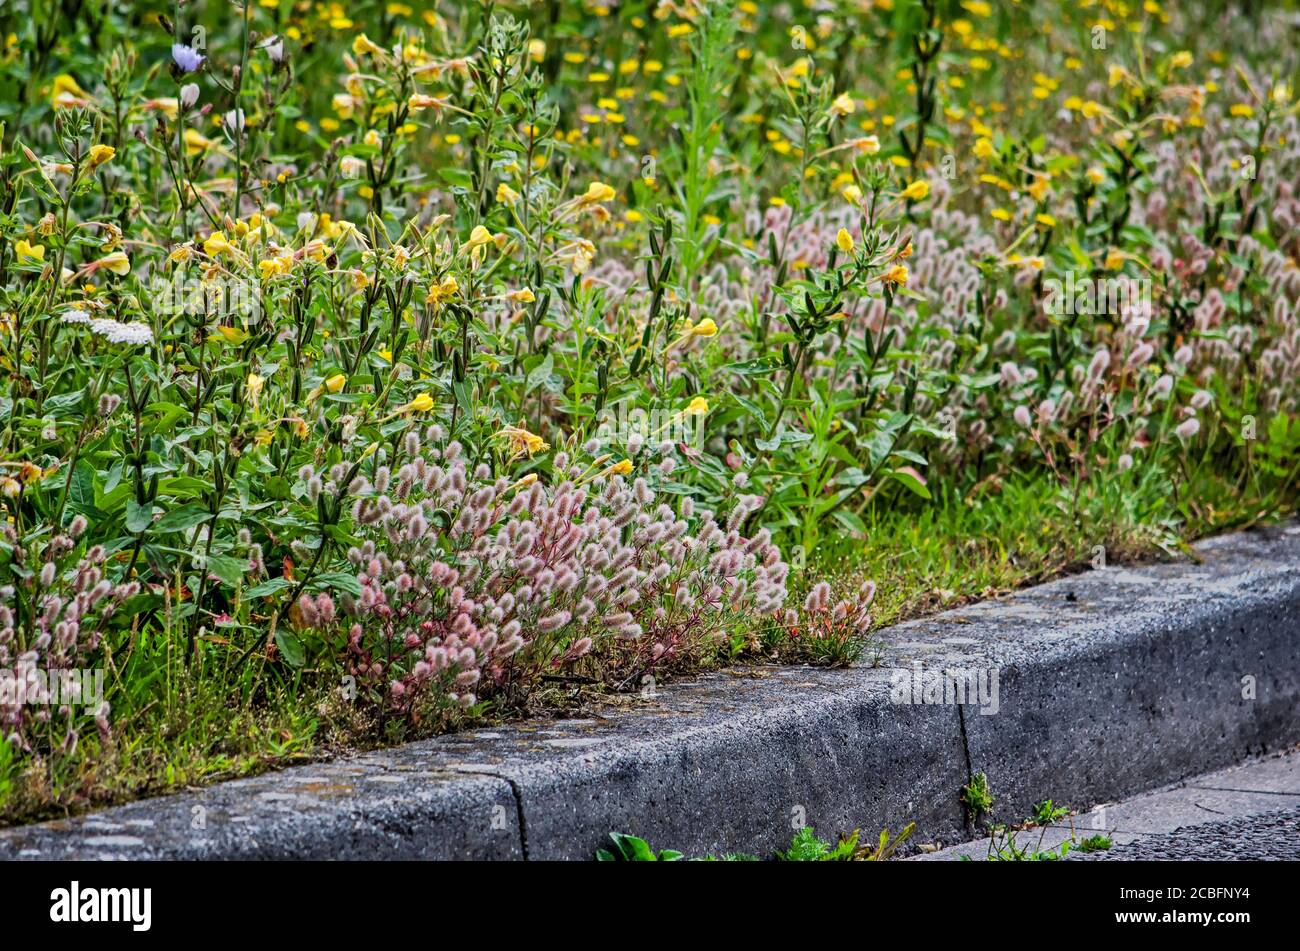 Evening-primrose, hare's-foot clover and other wildflowers growing by the roadside in summer in the town of Zwolle, The Netherlands Stock Photo